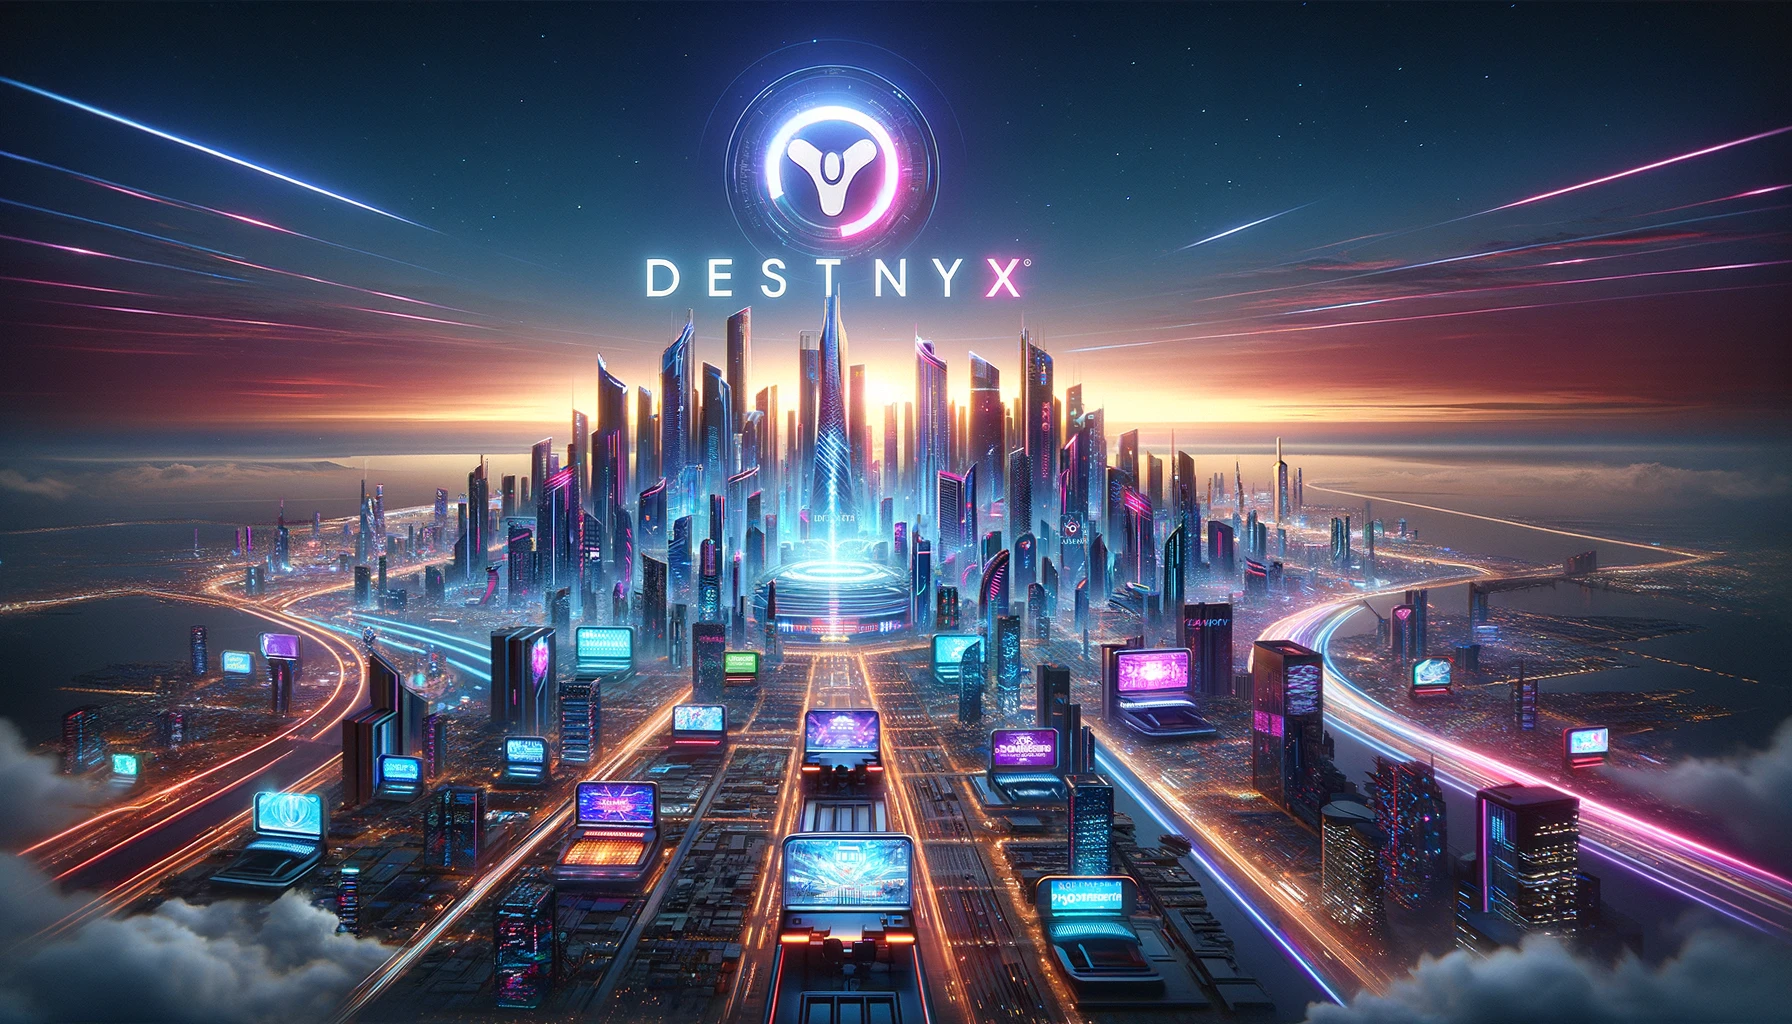 Sci-fi concept art featuring a sky city with the logo 'DESTNYX V' positioned above it, showcased at TrustDice